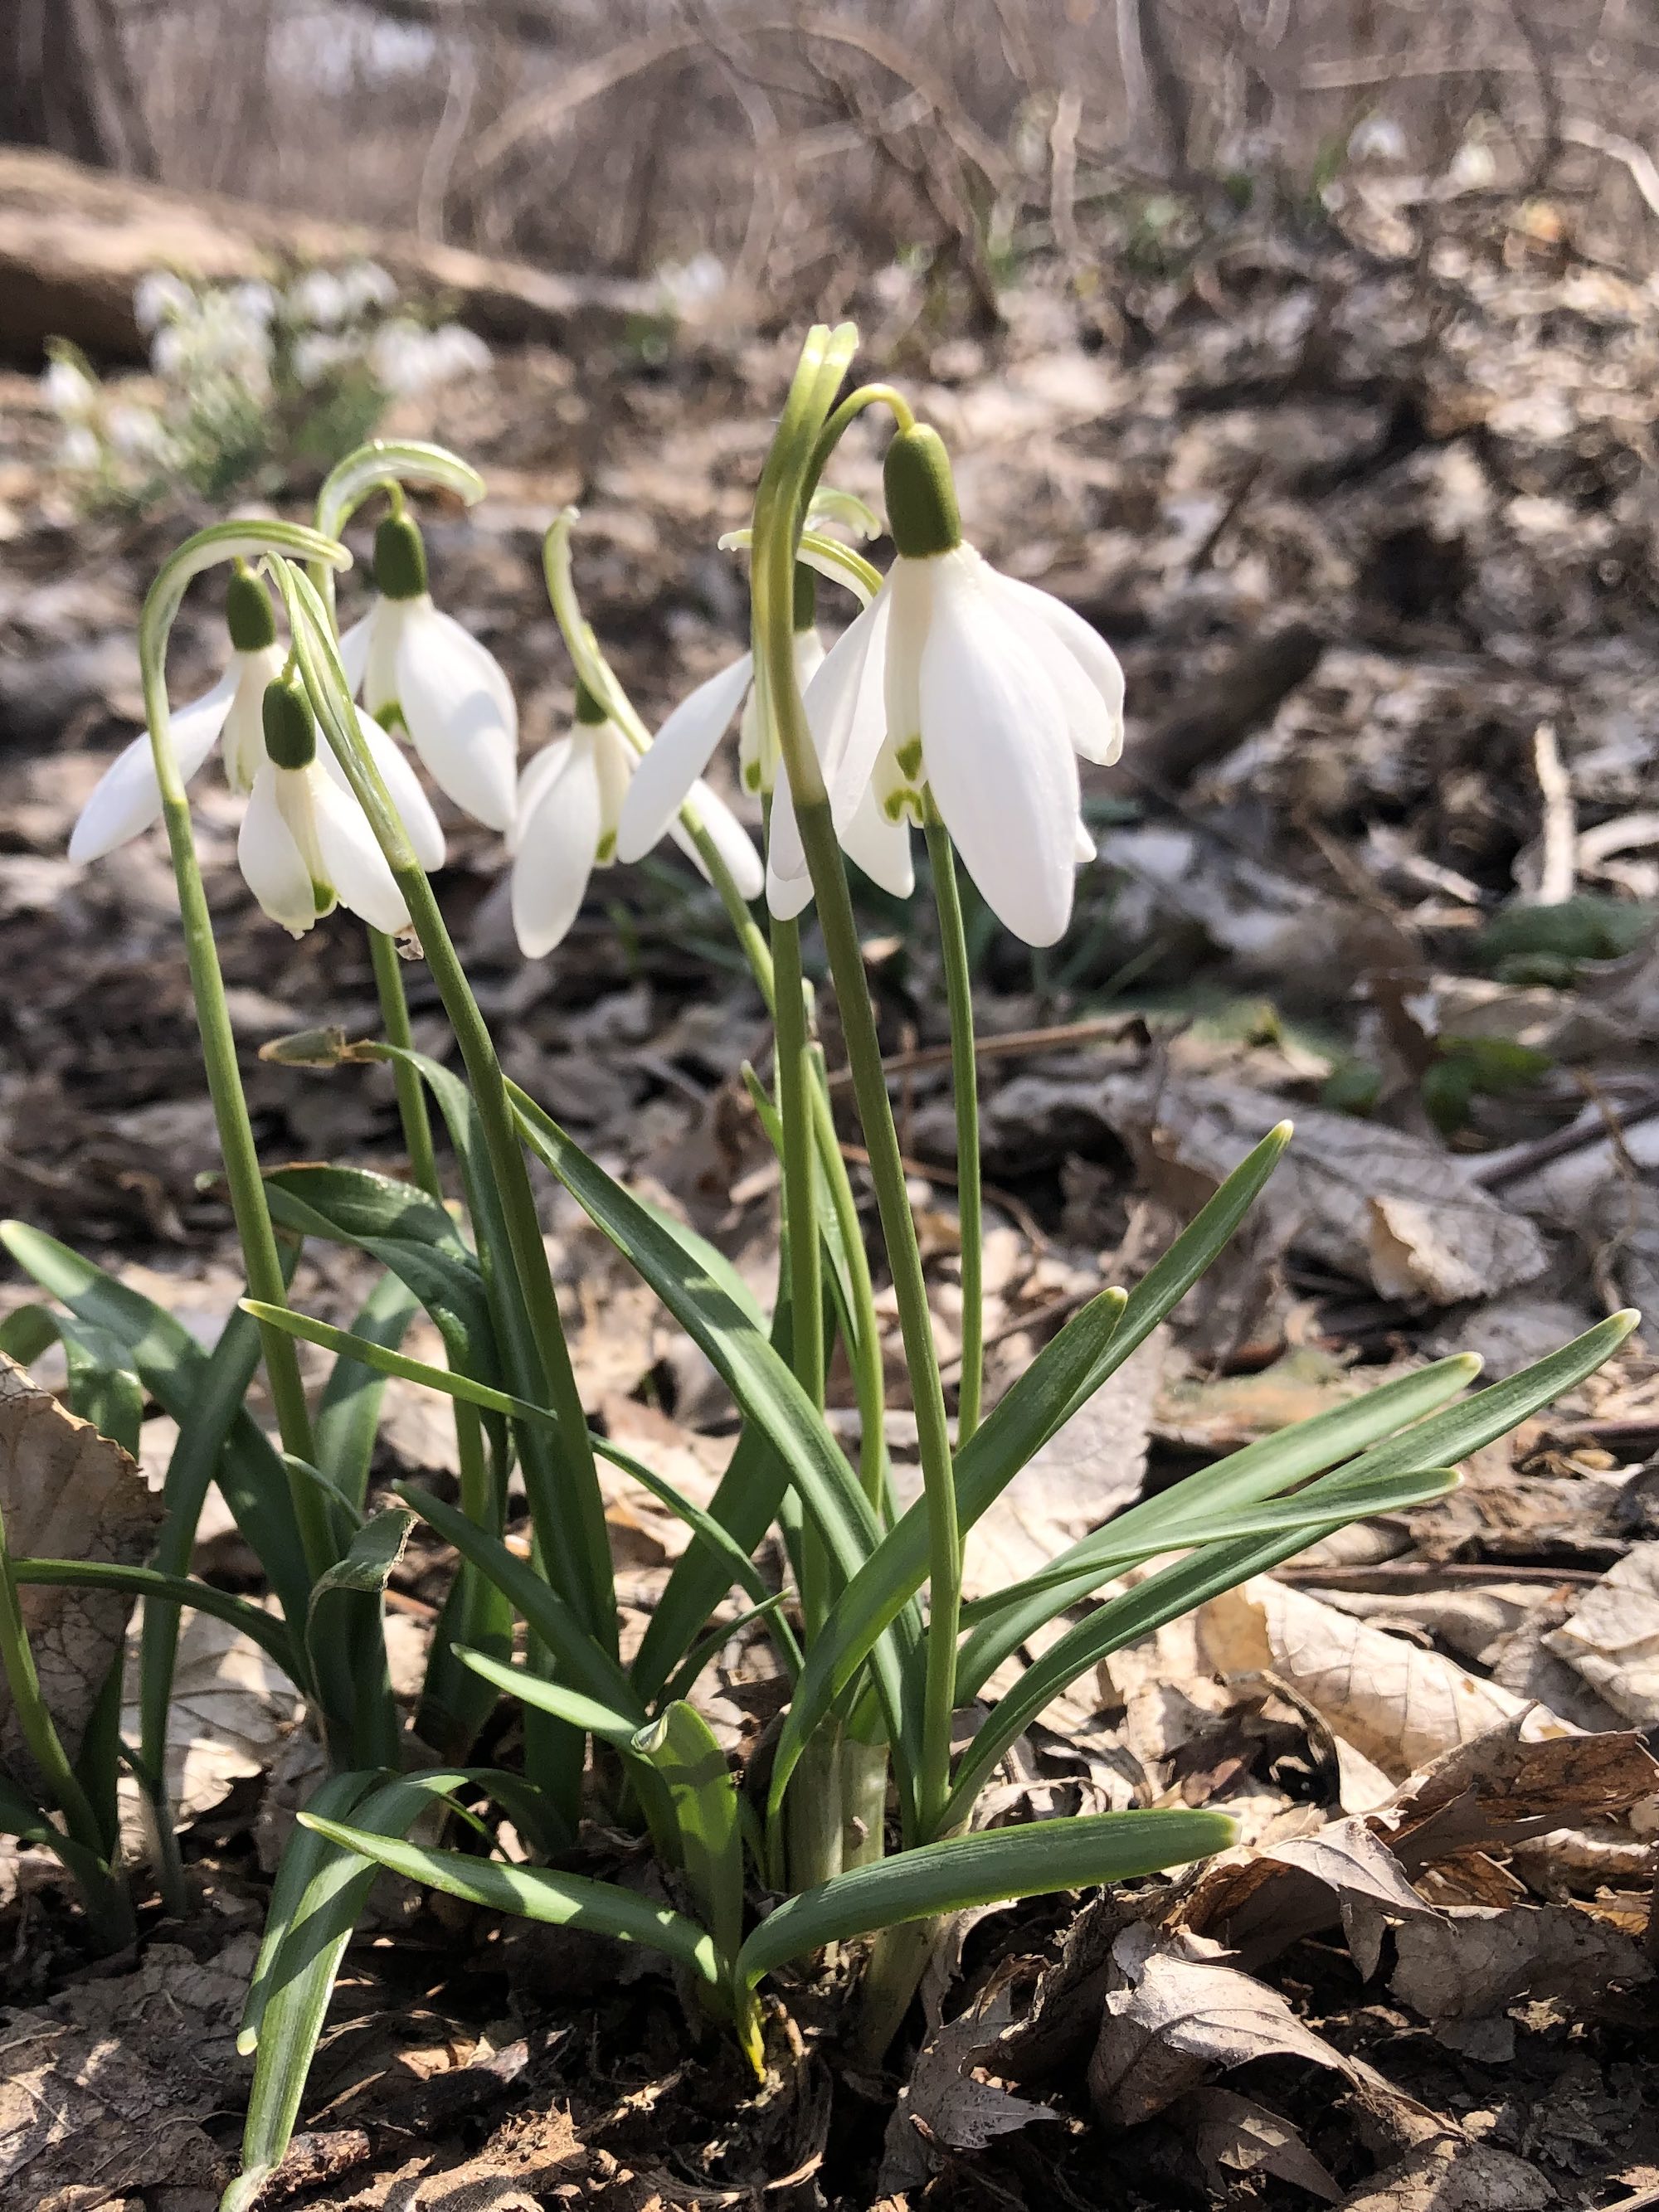 Snowdrops in Madison Wisconsin along Arbor Drive on March 21, 2023.